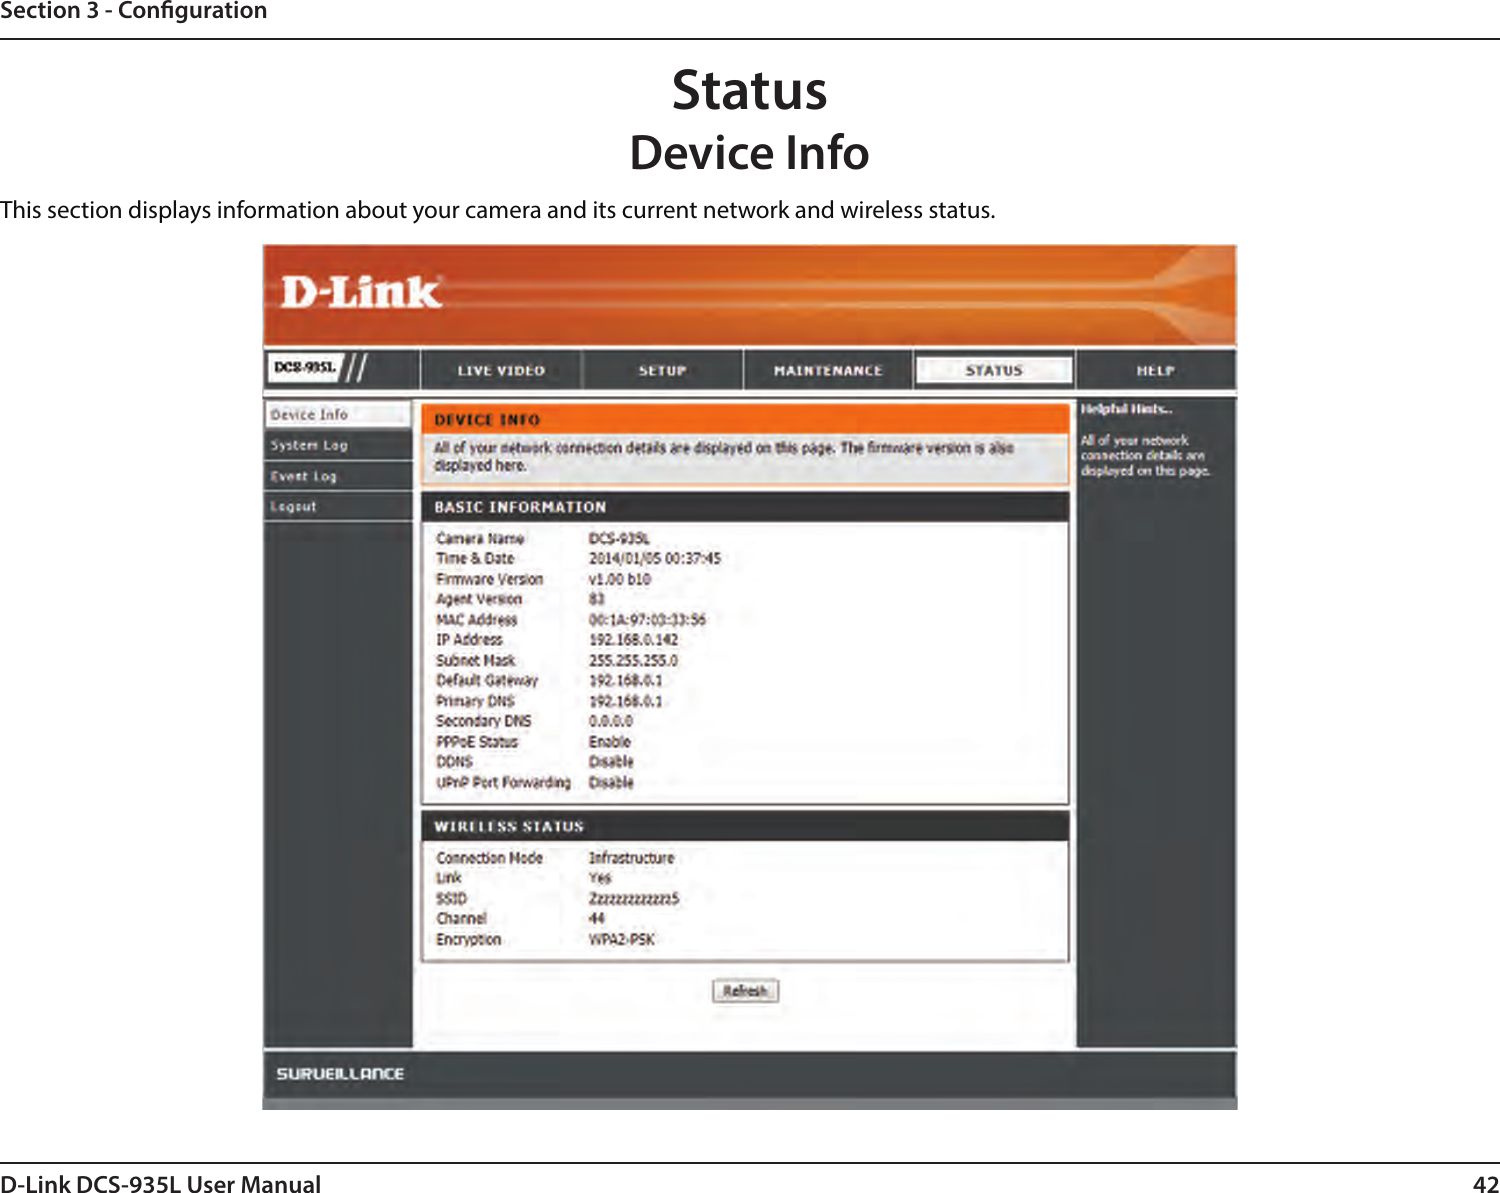 42D-Link DCS-935L User ManualSection 3 - CongurationStatusDevice InfoThis section displays information about your camera and its current network and wireless status.